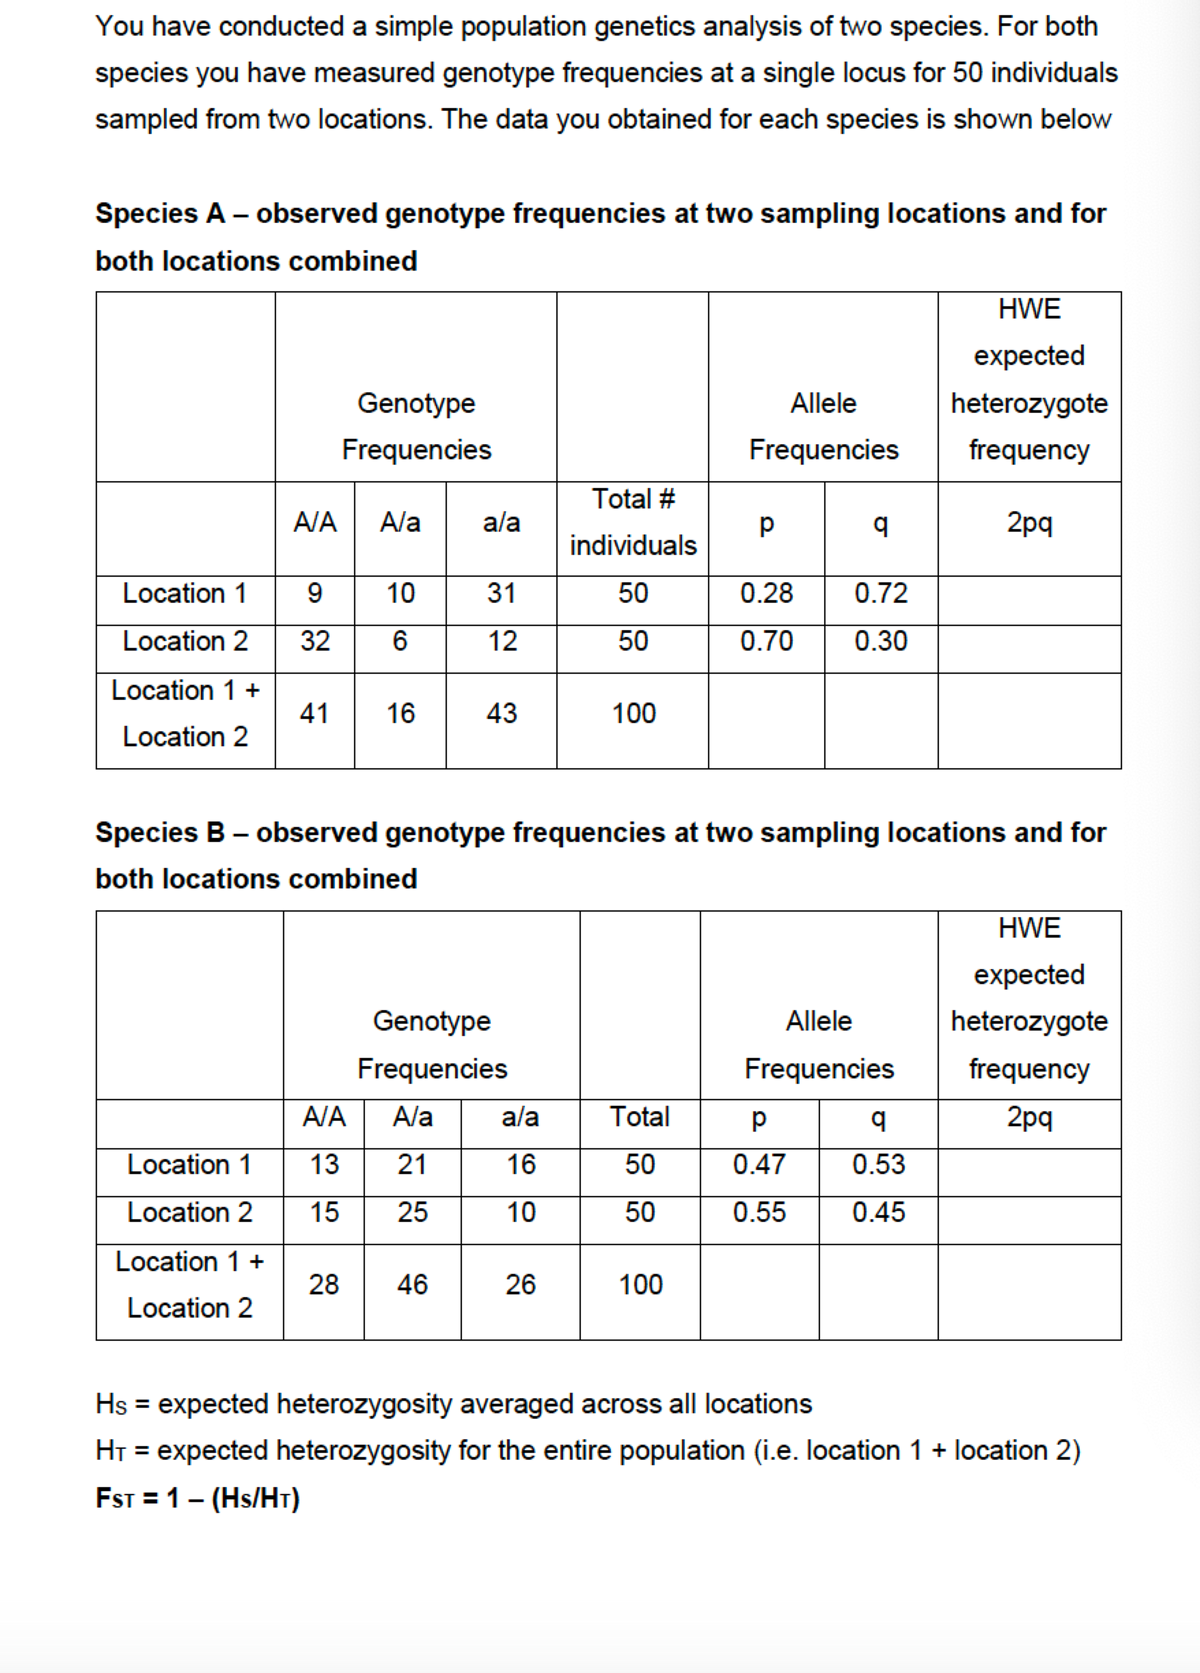 You have conducted a simple population genetics analysis of two species. For both
species you have measured genotype frequencies at a single locus for 50 individuals
sampled from two locations. The data you obtained for each species is shown below
Species A - observed genotype frequencies at two sampling locations and for
both locations combined
HWE
expected
Genotype
heterozygote
Allele
Frequencies
Frequencies
frequency
Total #
A/a
a/a
Р
q
2pq
individuals
Location 1
10
31
50
0.28 0.72
Location 2
6
12
50
0.70 0.30
Location 1 +
41
16
43
100
Location 2
Species B - observed genotype frequencies at two sampling locations and for
both locations combined
HWE
expected
Allele
heterozygote
Genotype
Frequencies
Frequencies
frequency
A/A A/a
a/a
Total
Р
2pq
Location 1
13
21
16
50
0.47
0.53
Location 2
15
25
10
50
0.55
0.45
Location 1 +
28
46
26
100
Location 2
Hs = expected heterozygosity averaged across all locations
H₁ = expected heterozygosity for the entire population (i.e. location 1 + location 2)
FST = 1 (HS/HT)
A/A
9
32